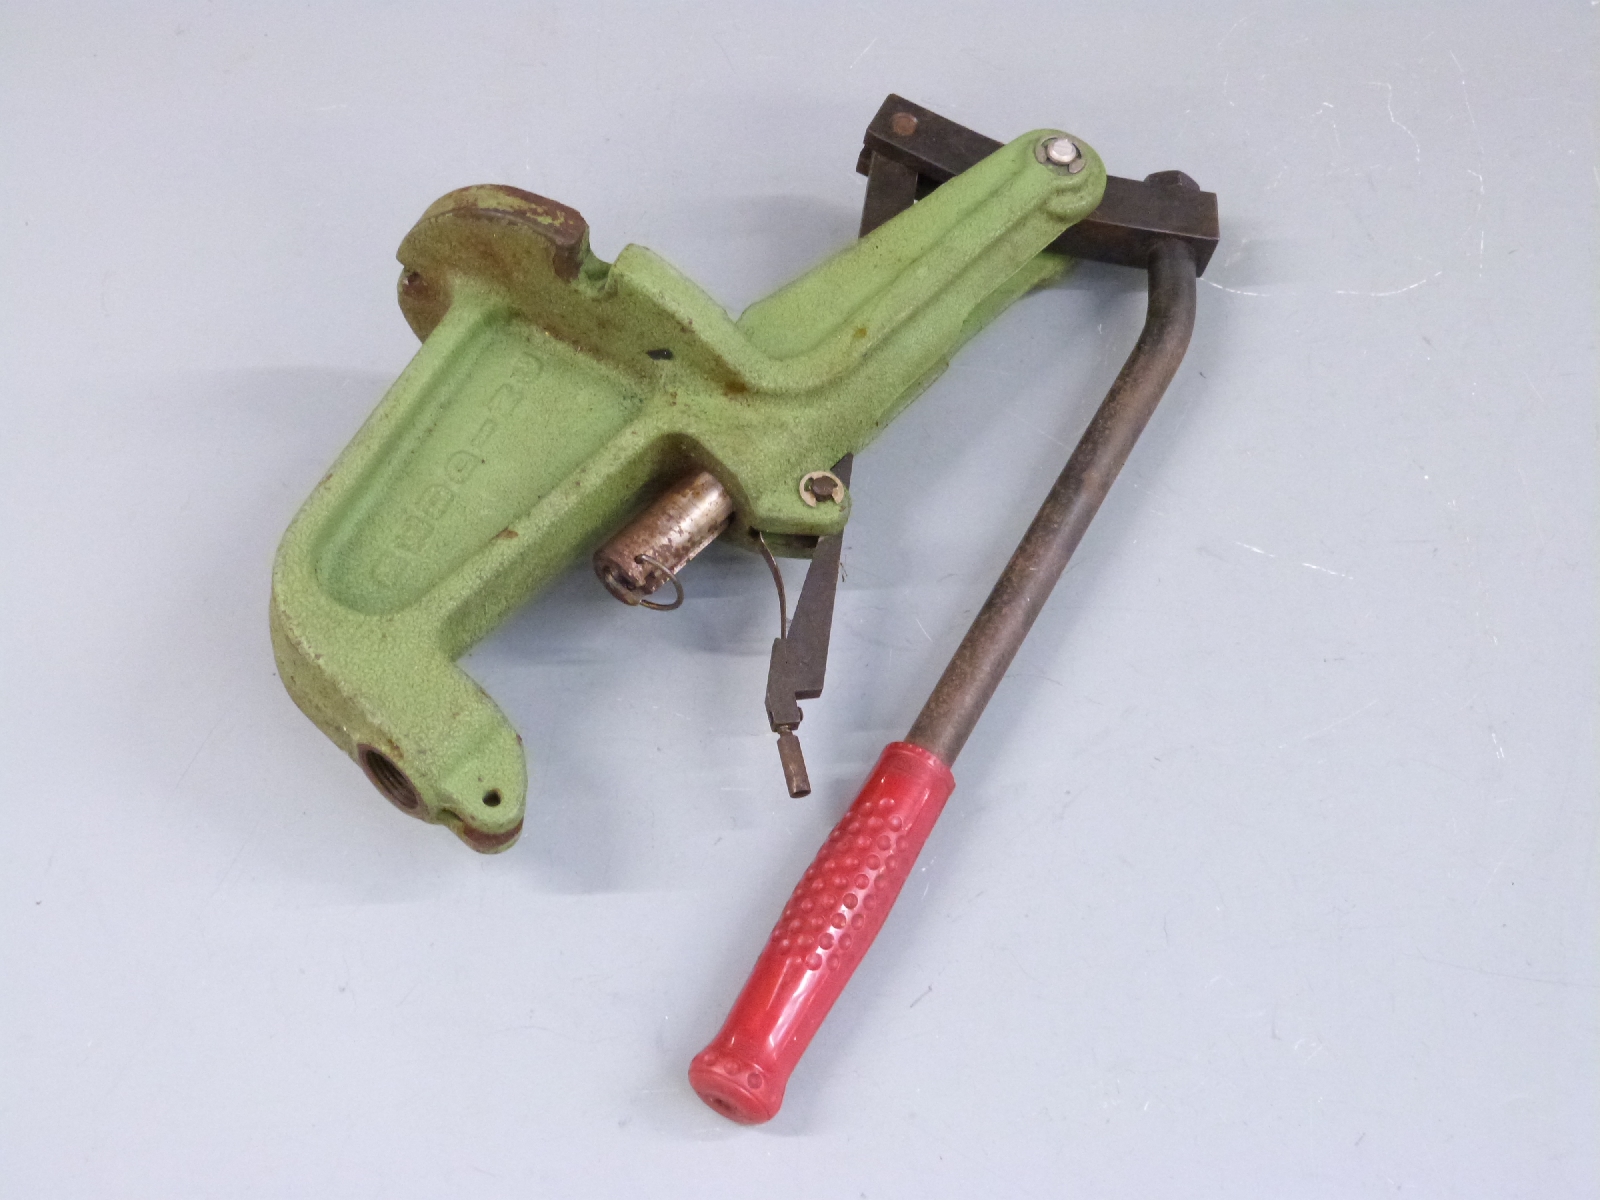 A handheld clay pigeon launcher together with a Redding shotgun cartridge re-loading tool. - Image 3 of 3